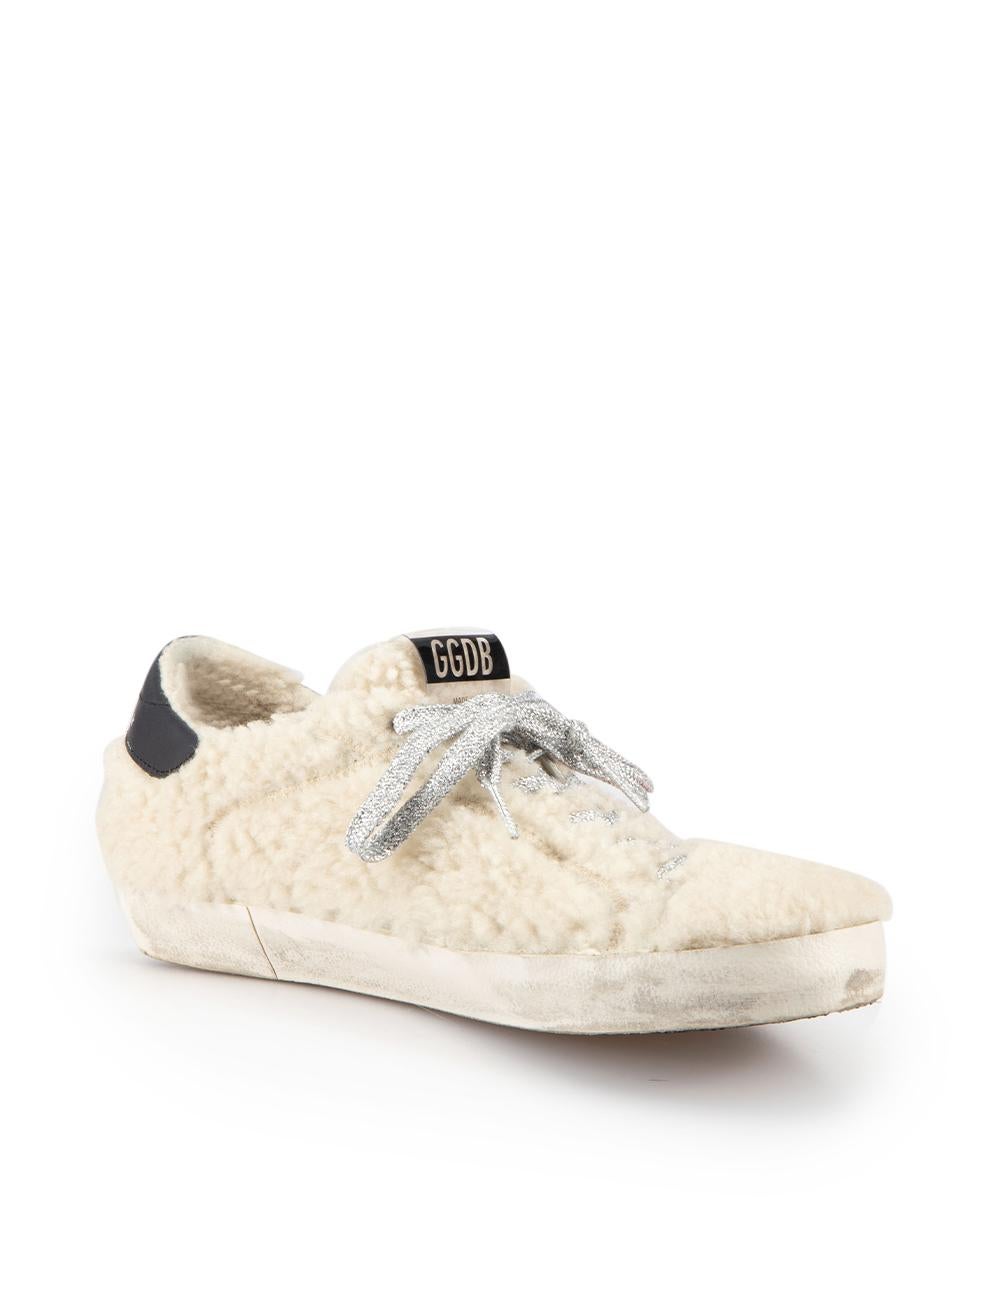 CONDITION is Good. Minor wear to trainers is evident. Light wear to the shearling of both that has darkened with wear on this used Golden Goose designer resale item. 
 
 Details
  Cream
 Shearling
 Low top trainers
 Round toe
 Flatform heel
 Silver